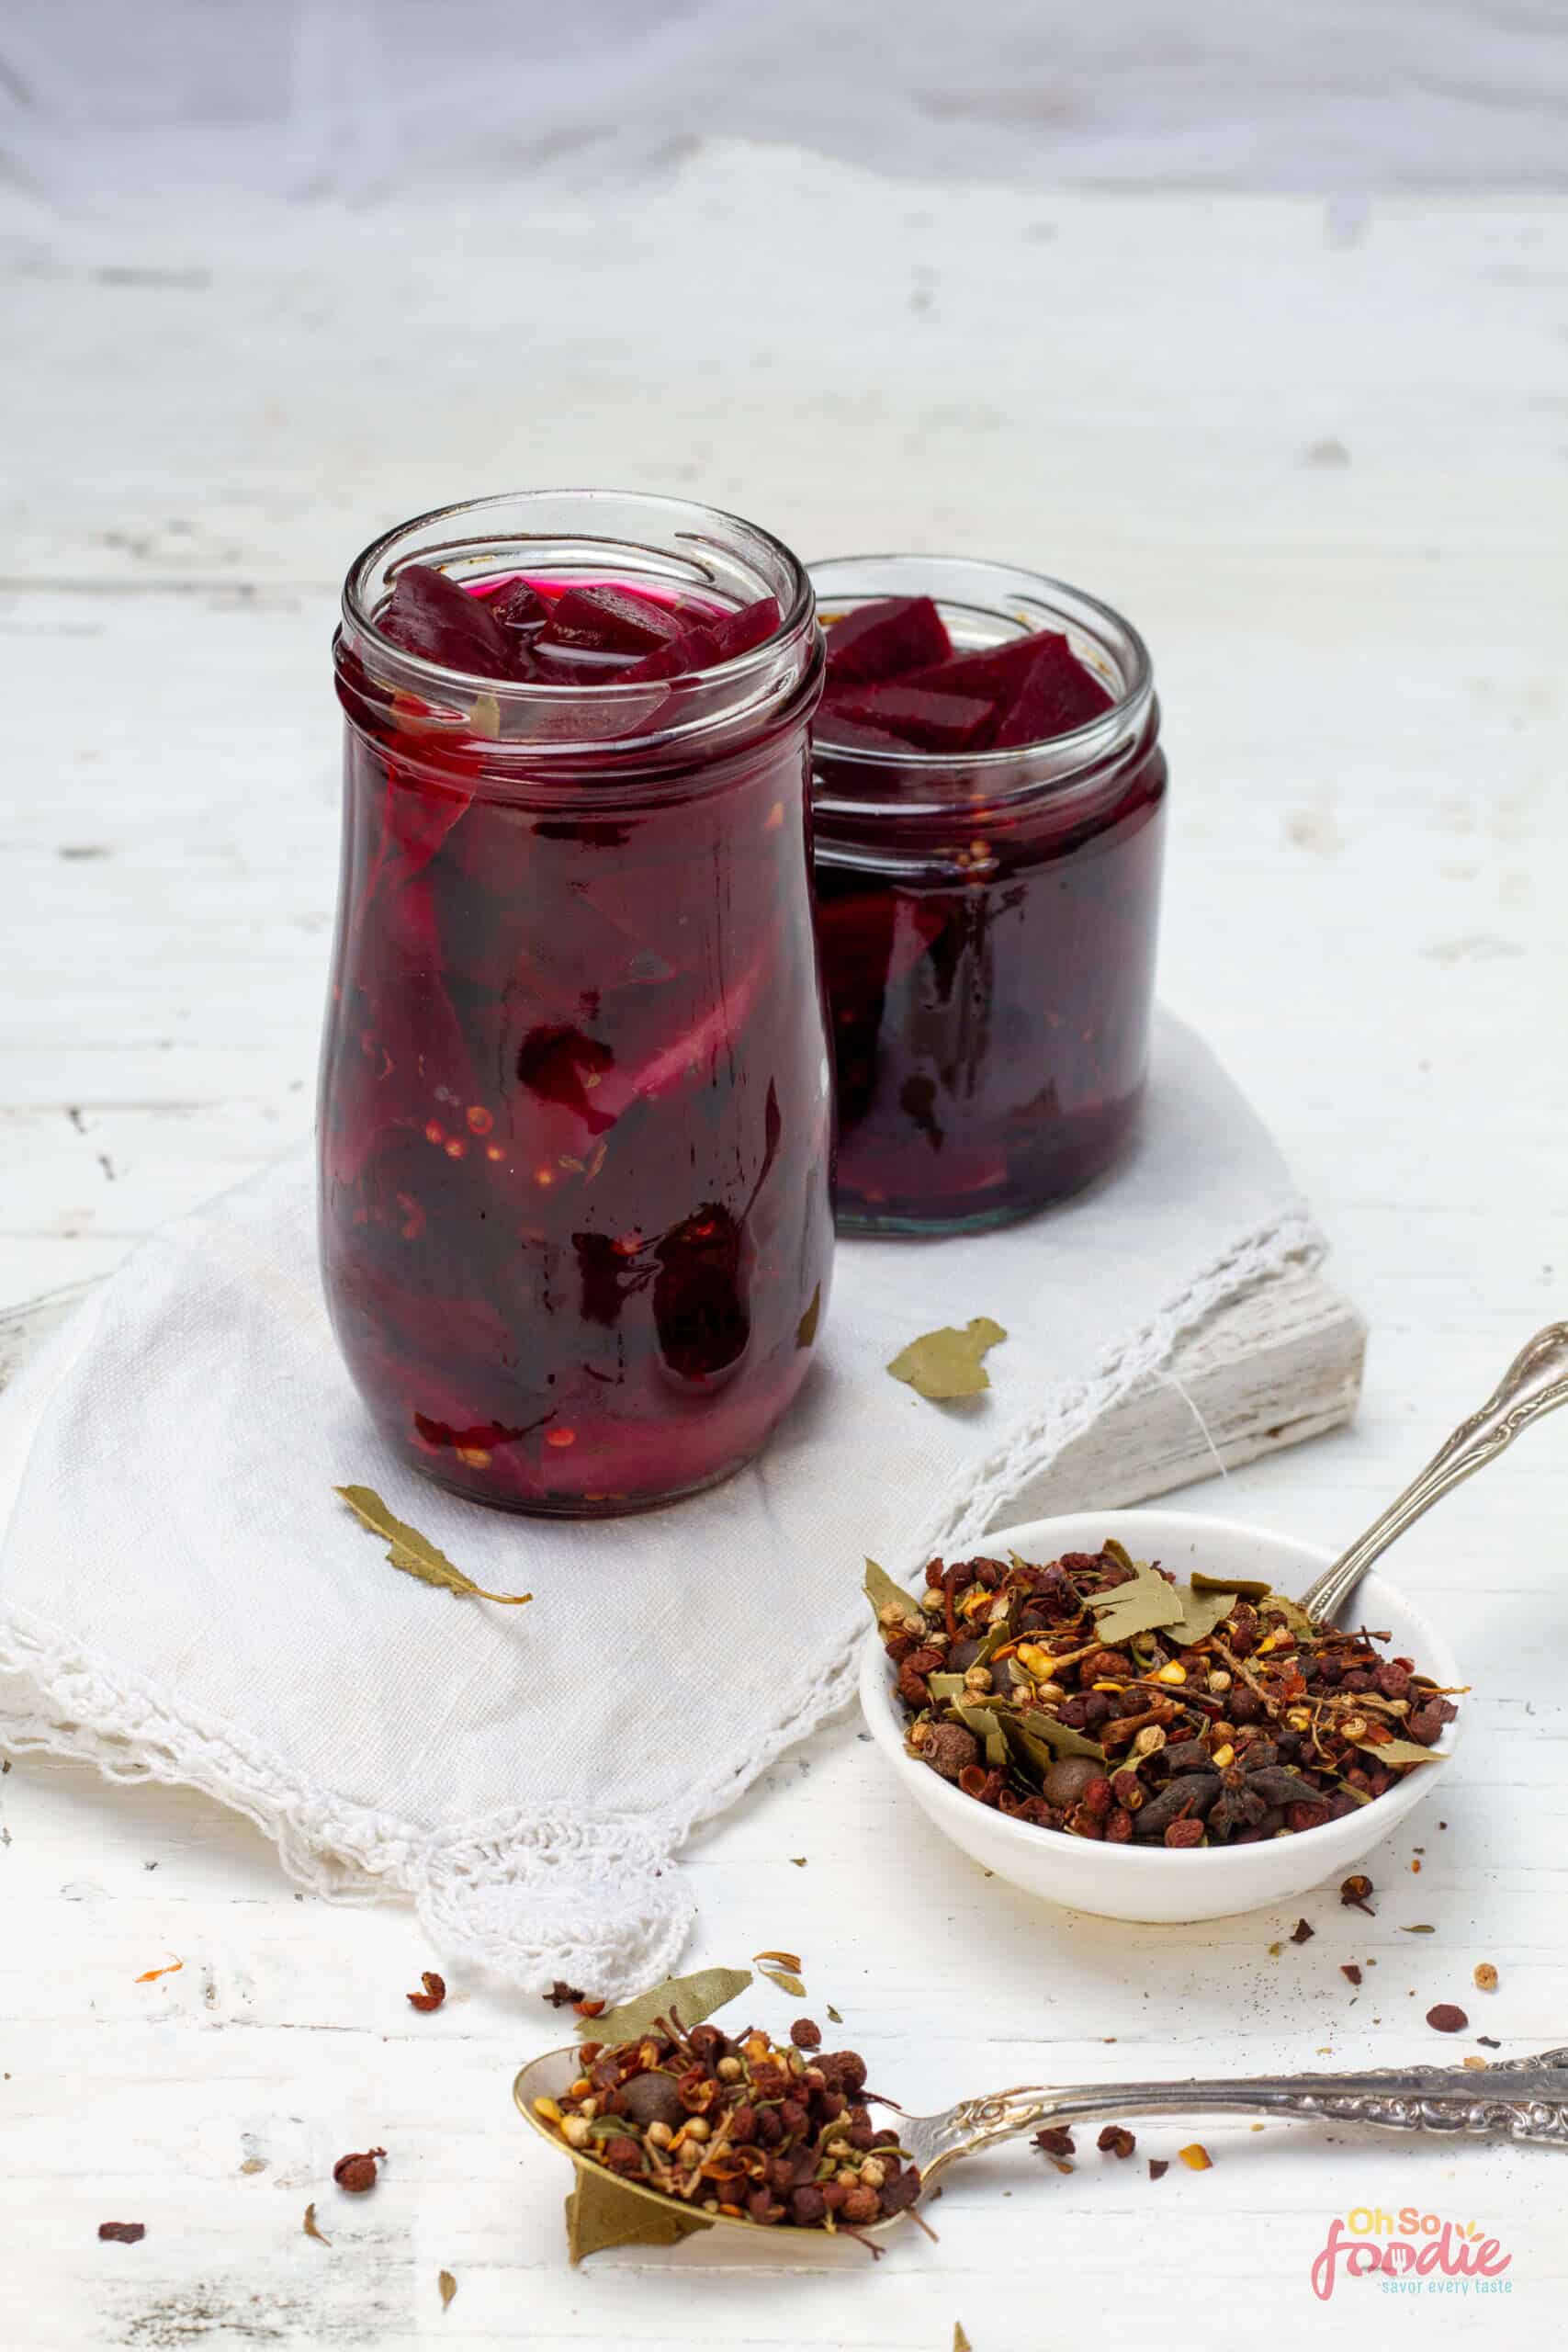 Pickled beets with pickling spice